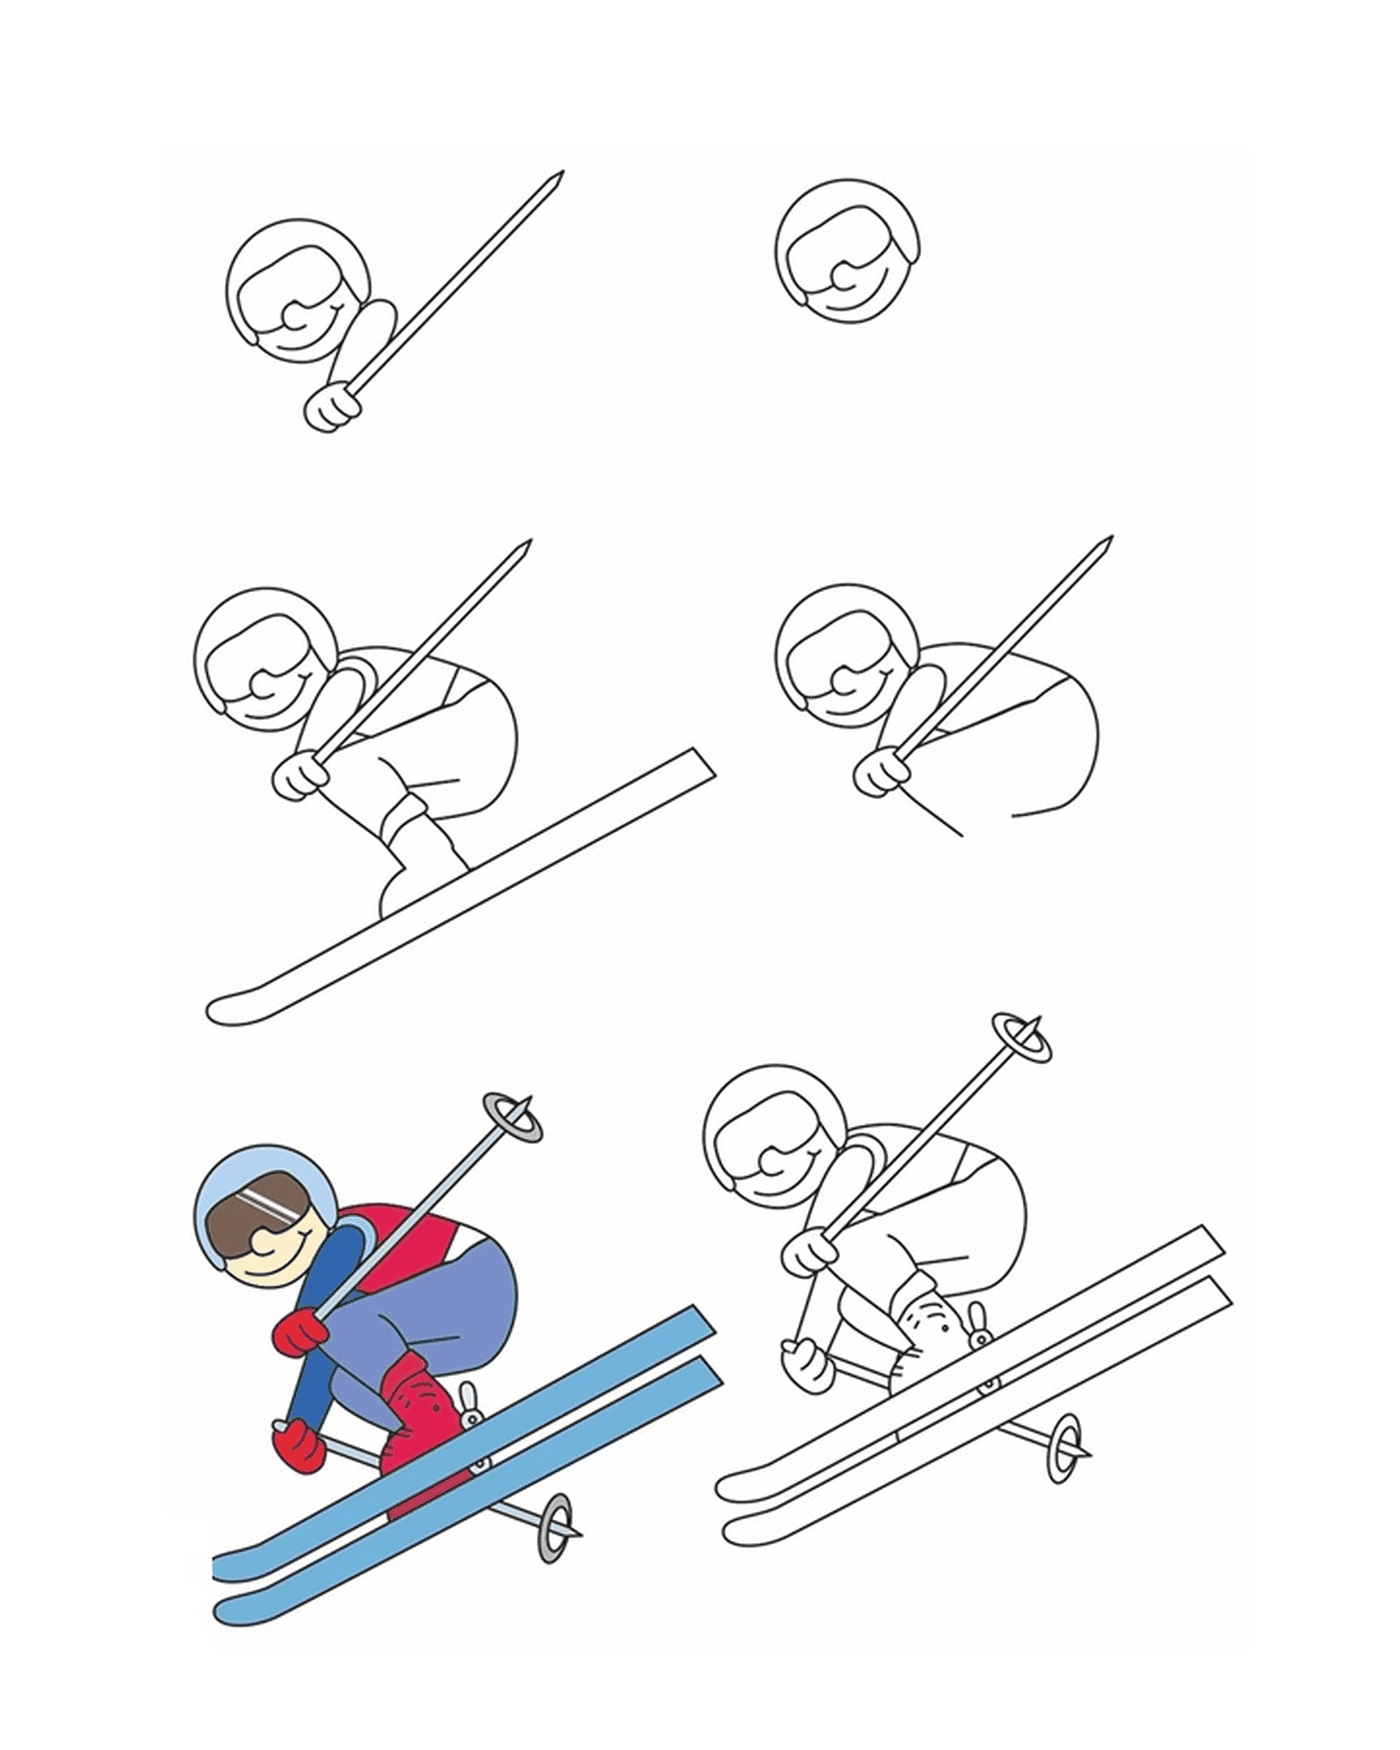  How to draw acrobatic skiing 